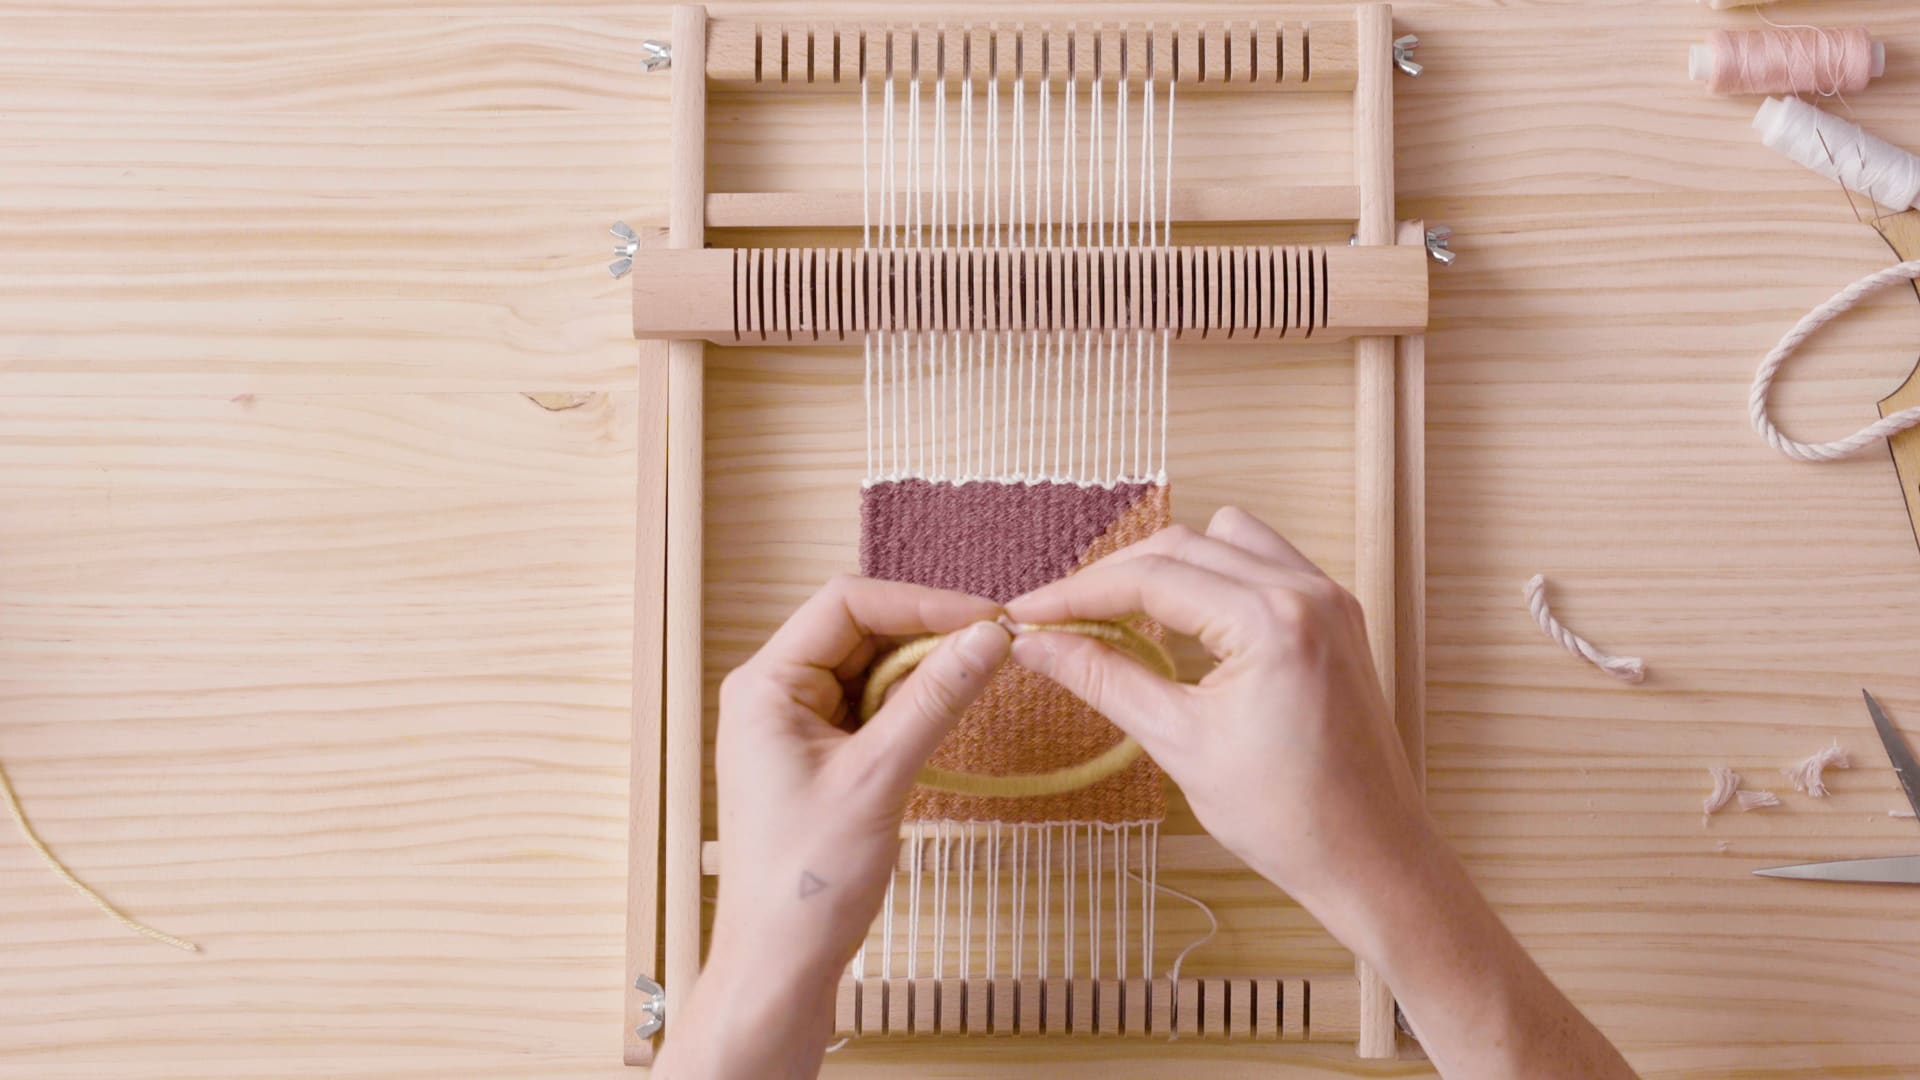 Weaving Lessons, How to Use an Embroidery Hoop as a Loom